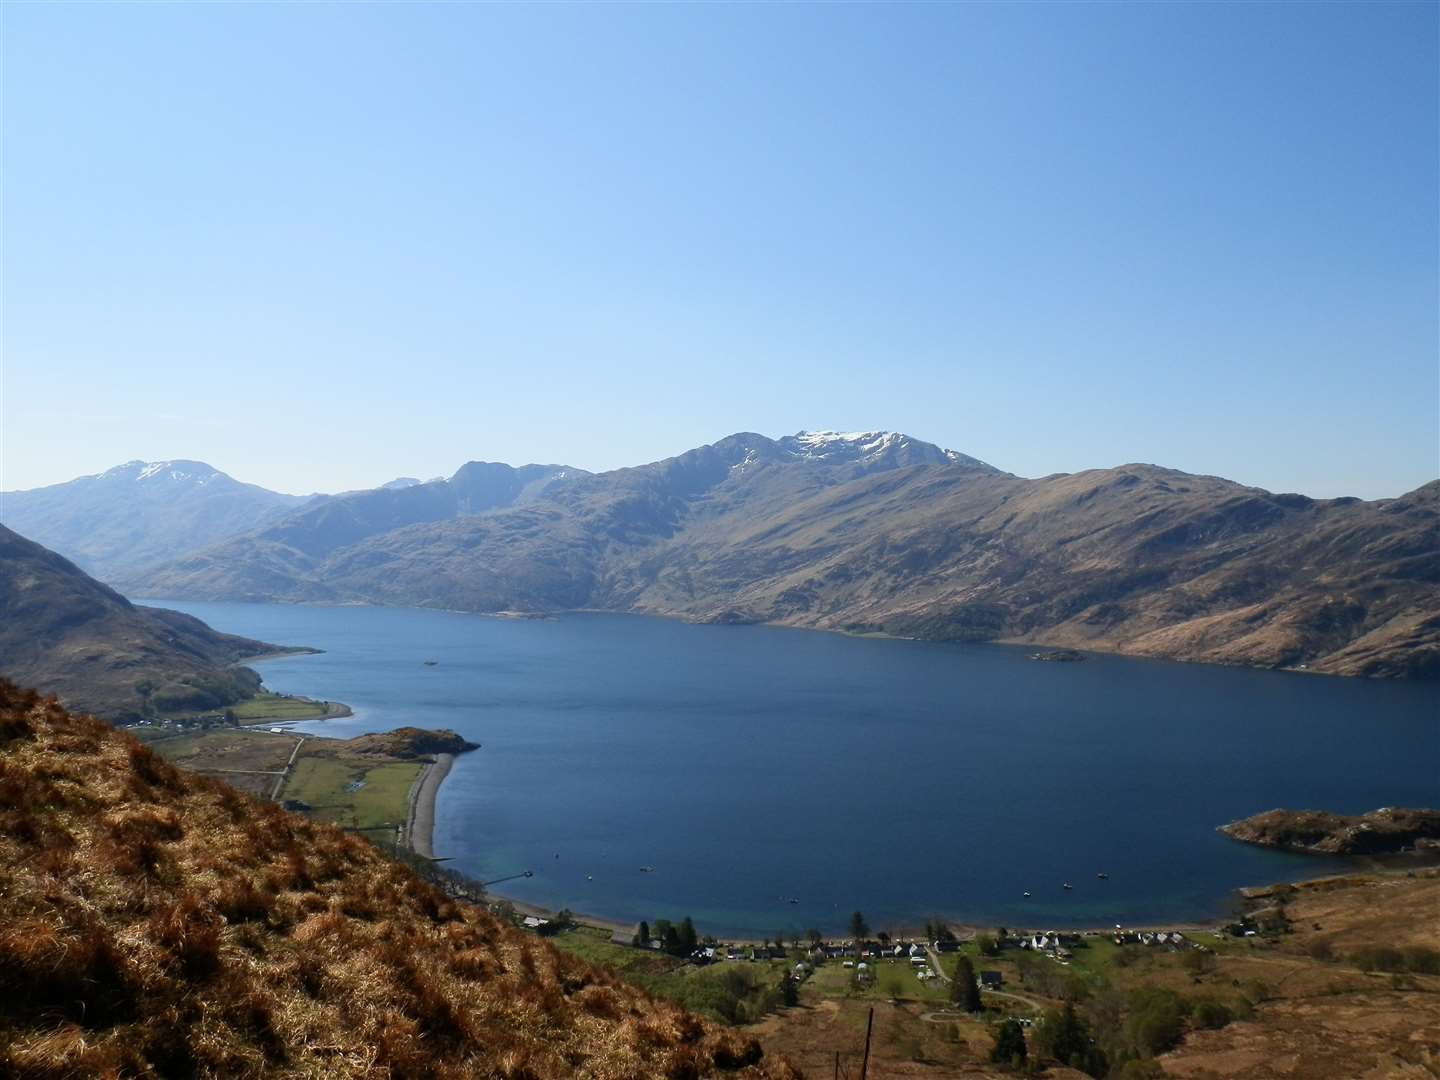 Ladhar Bheinn and the Knoydart peninsula across Loch Hourn from Beinn Sgritheall. Picture: Adobe Stock